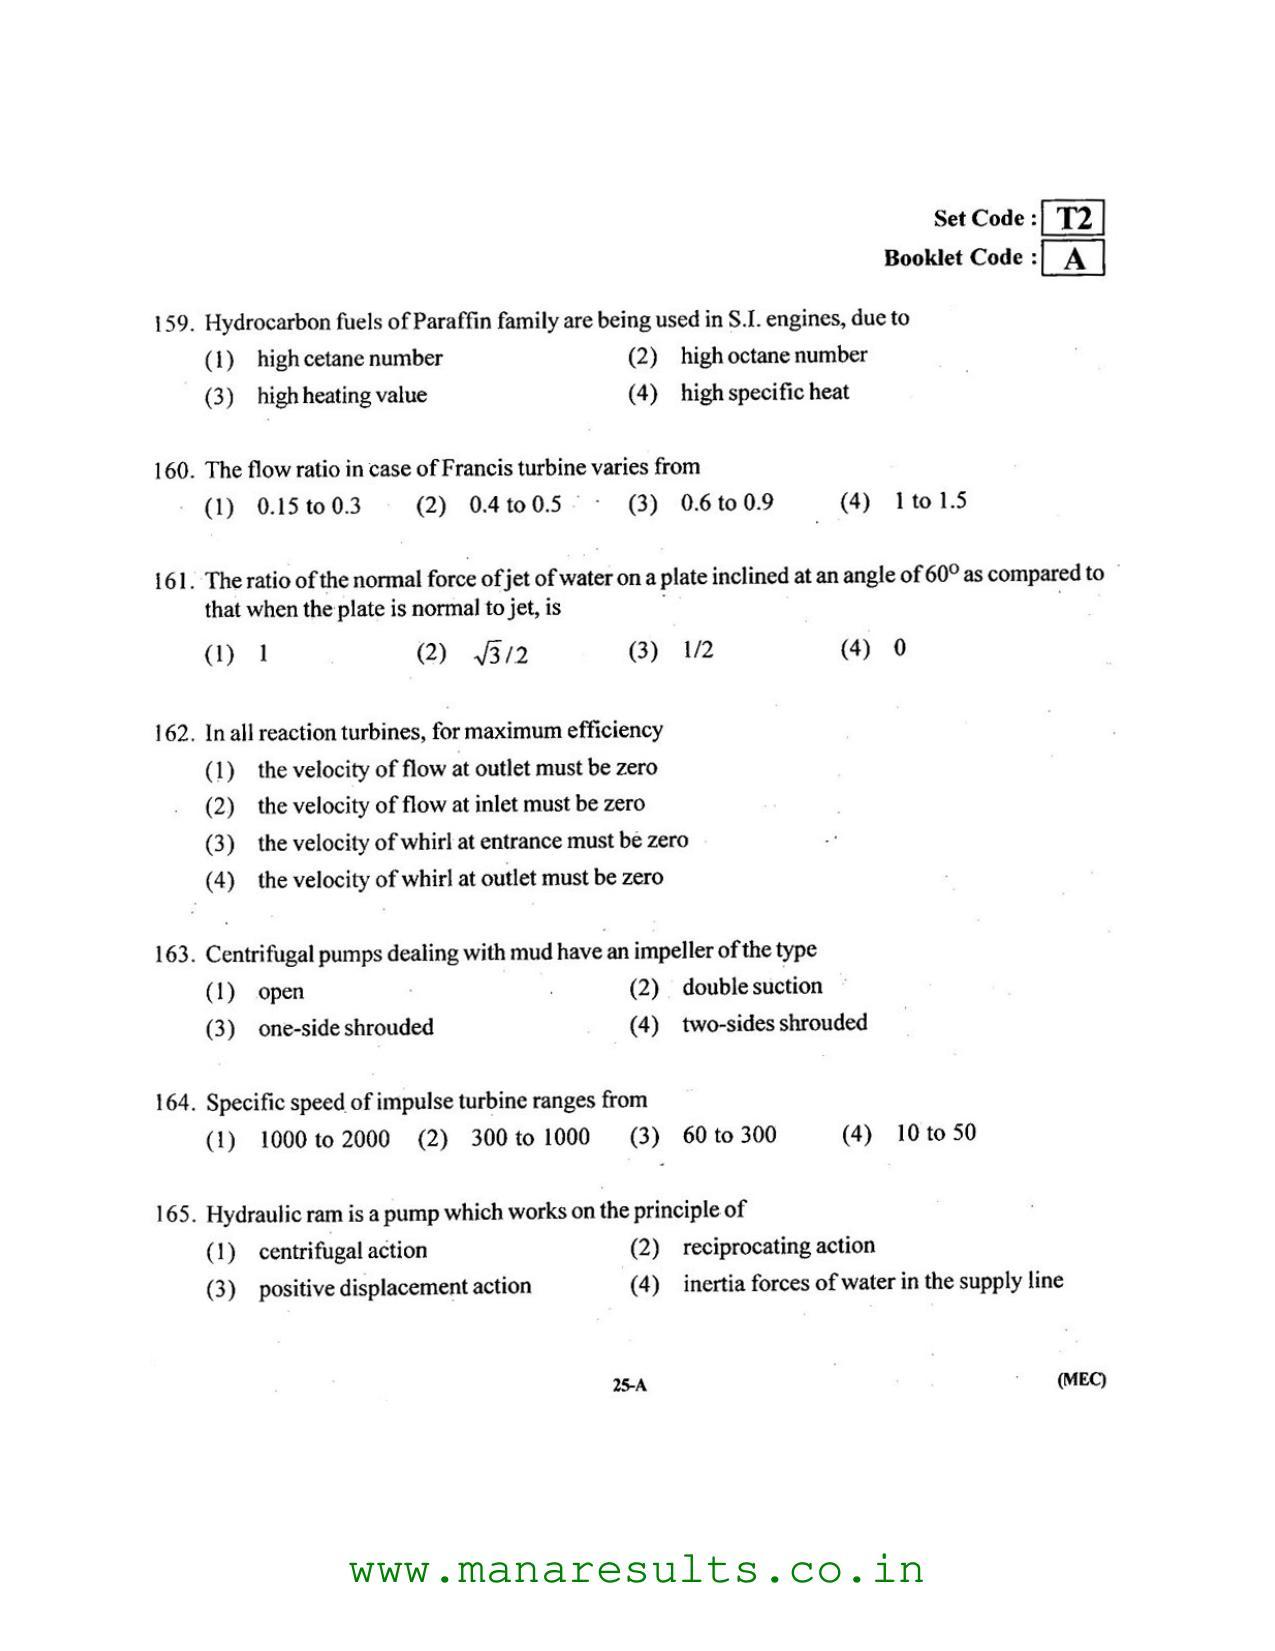 AP ECET 2016 Mechanical Engineering Old Previous Question Papers - Page 24